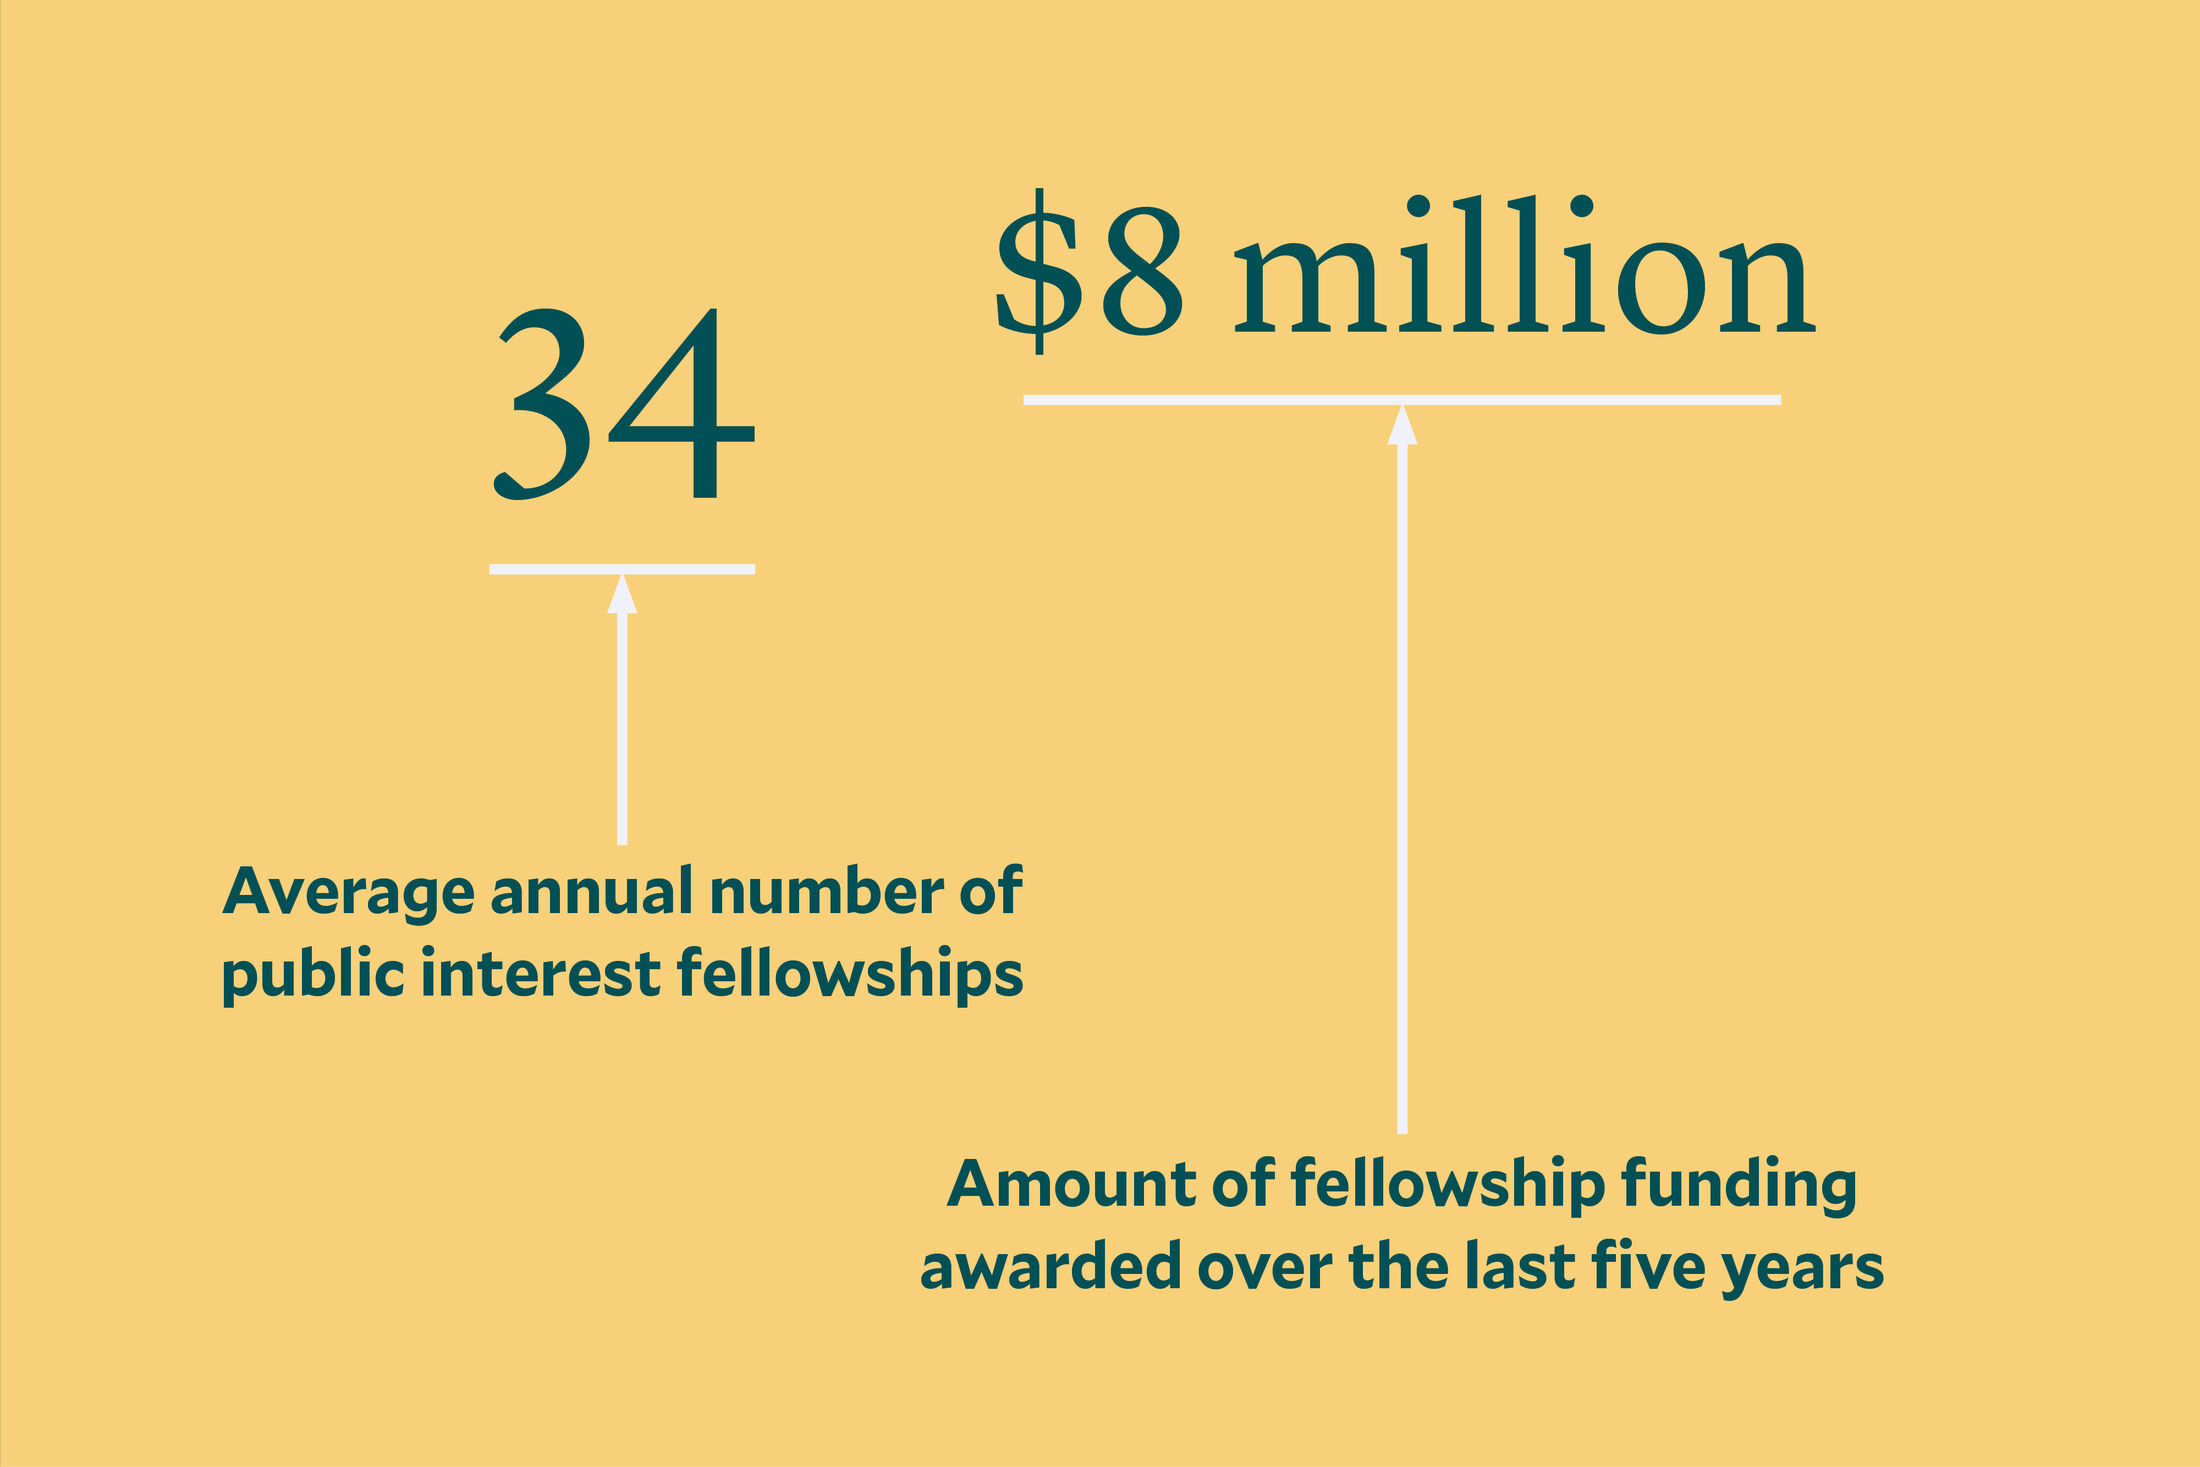 Text with arrows pointing to numbers: "Average annual number of public interest fellowships: 34. Amount of fellowship funding awarded over the last five years: $ million."